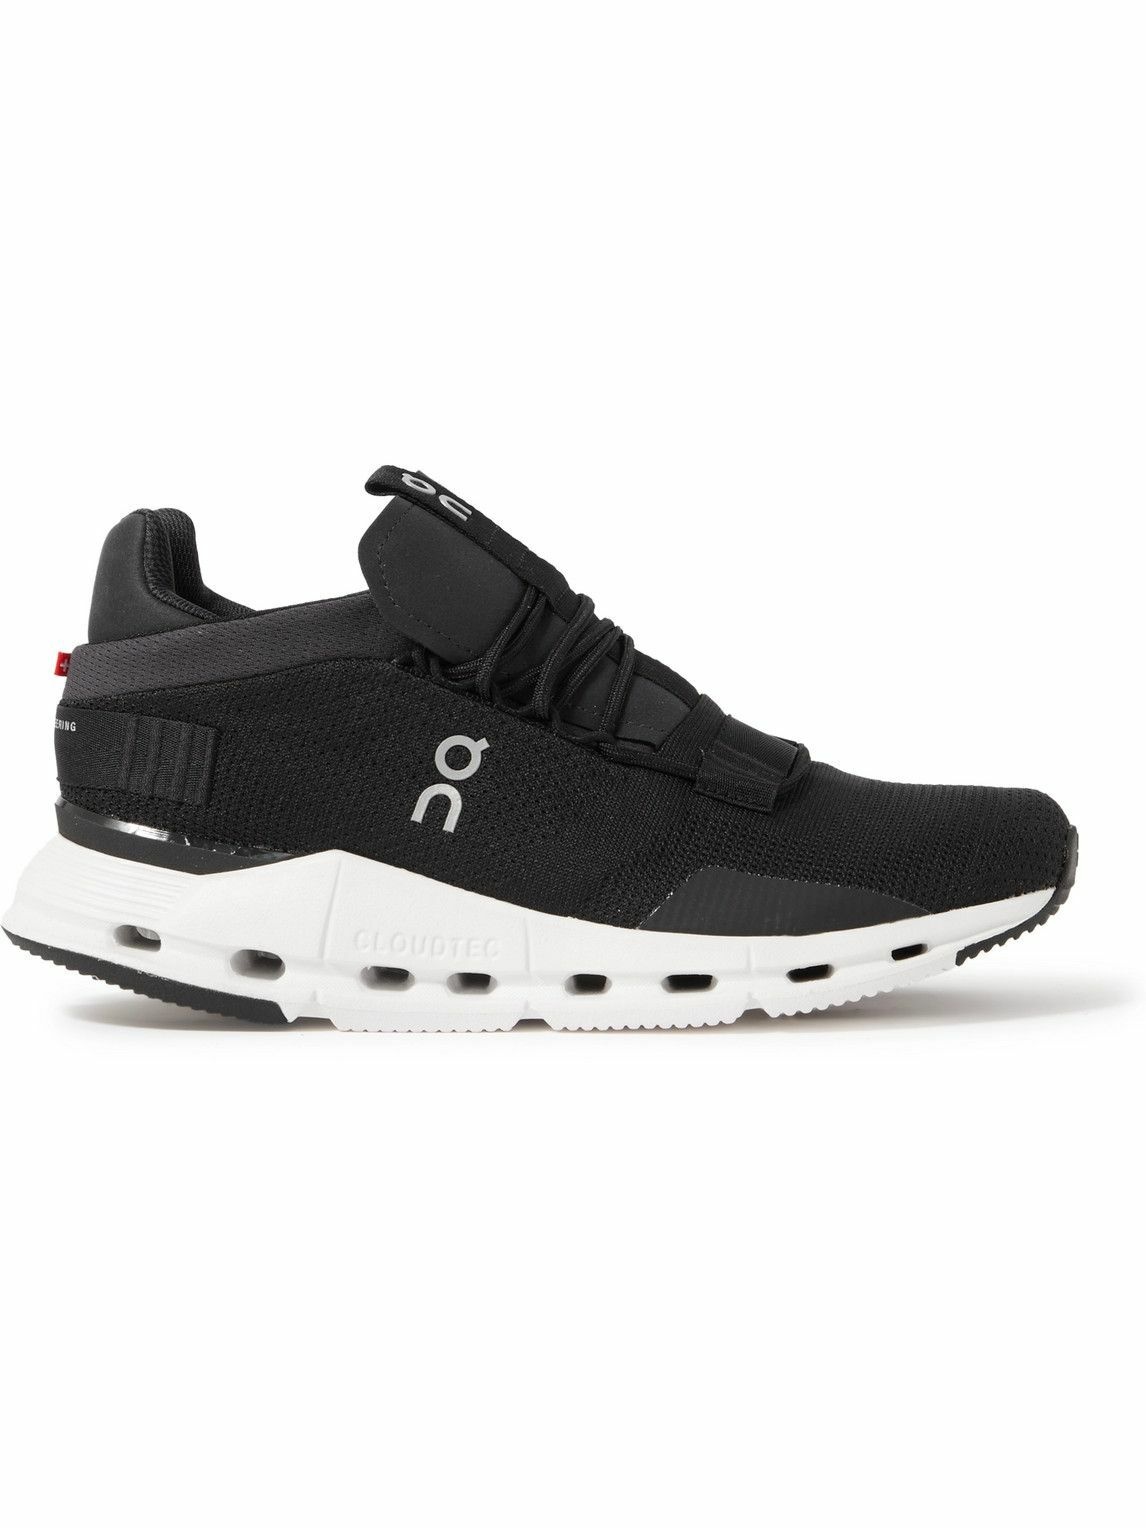 ON - Cloudnova Rubber-Trimmed Mesh Running Sneakers - Black On